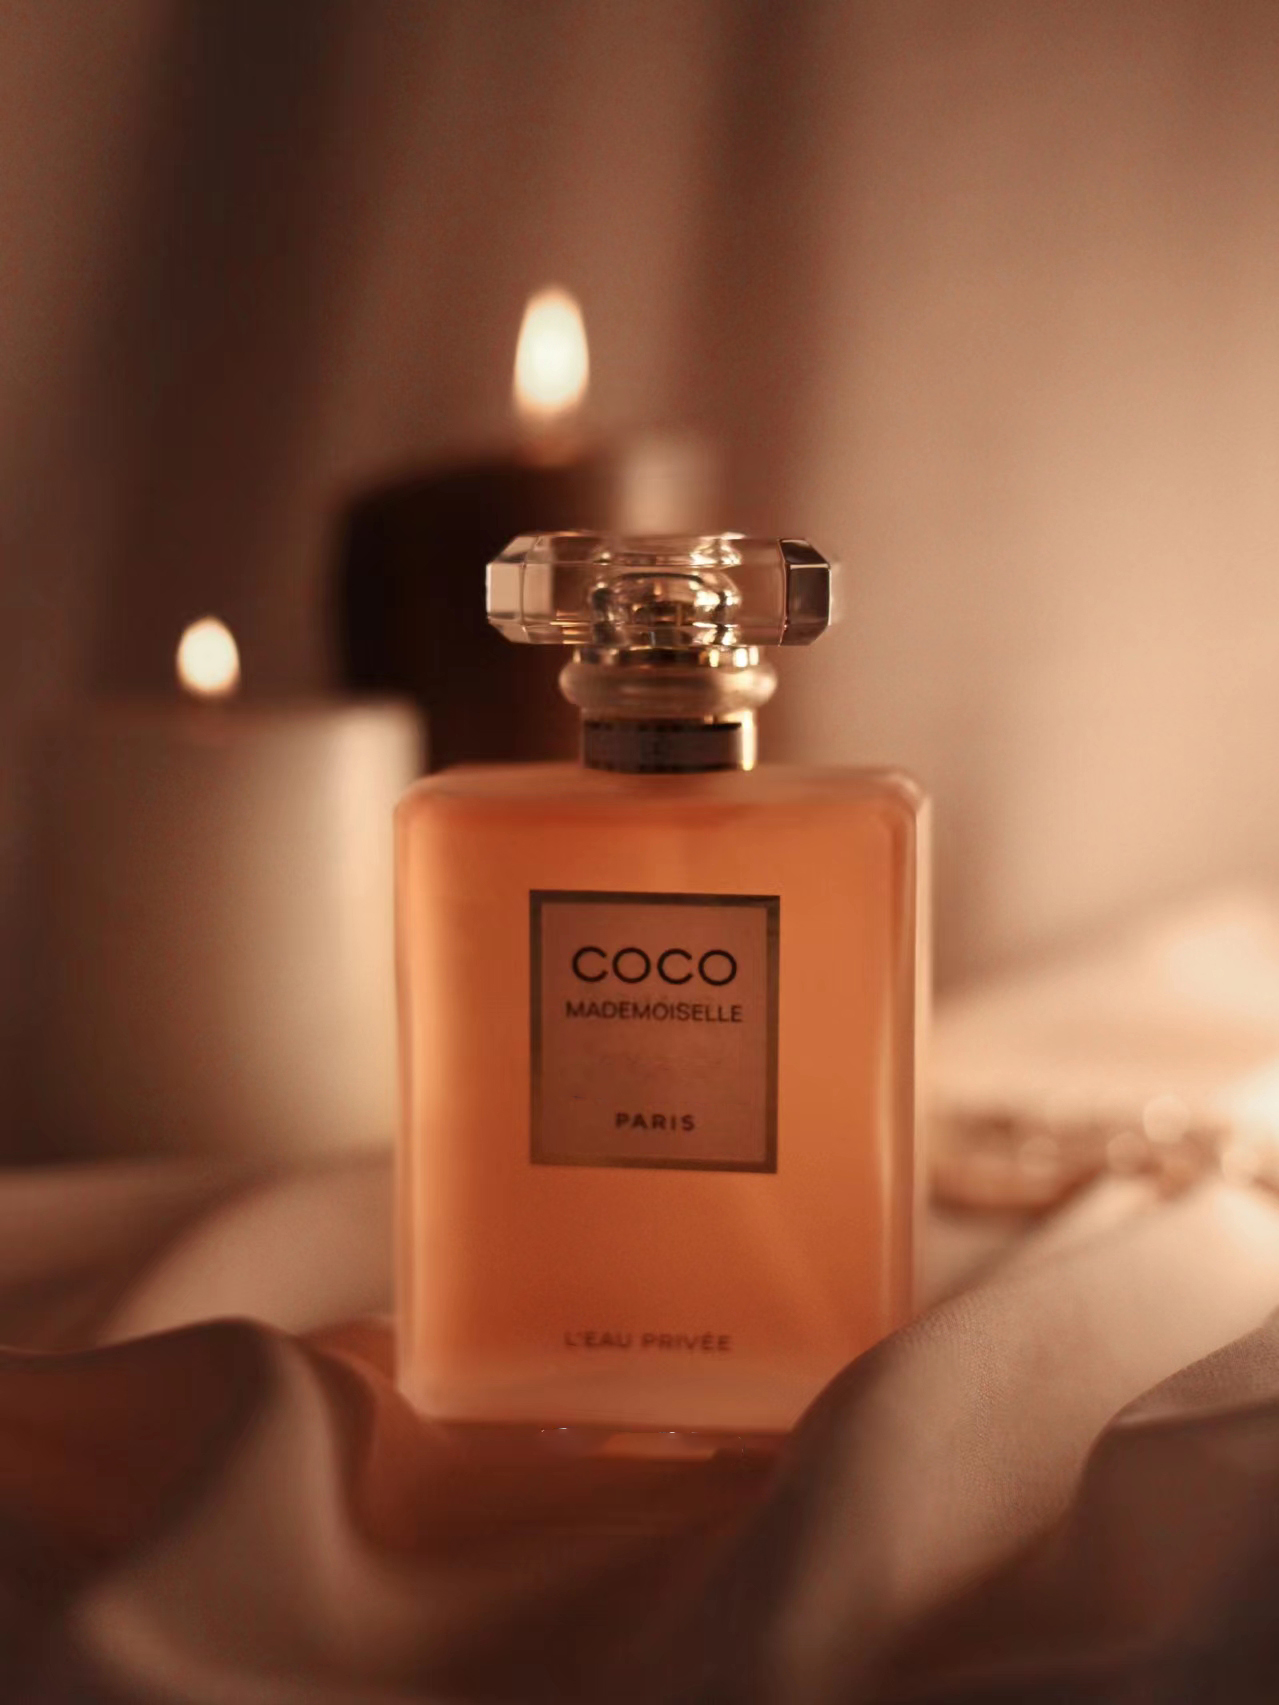 

Coco Woman Perfume night fragrance for women elegant and charming fragrance spray oriental floral notes 100ml good smell frosted bottle